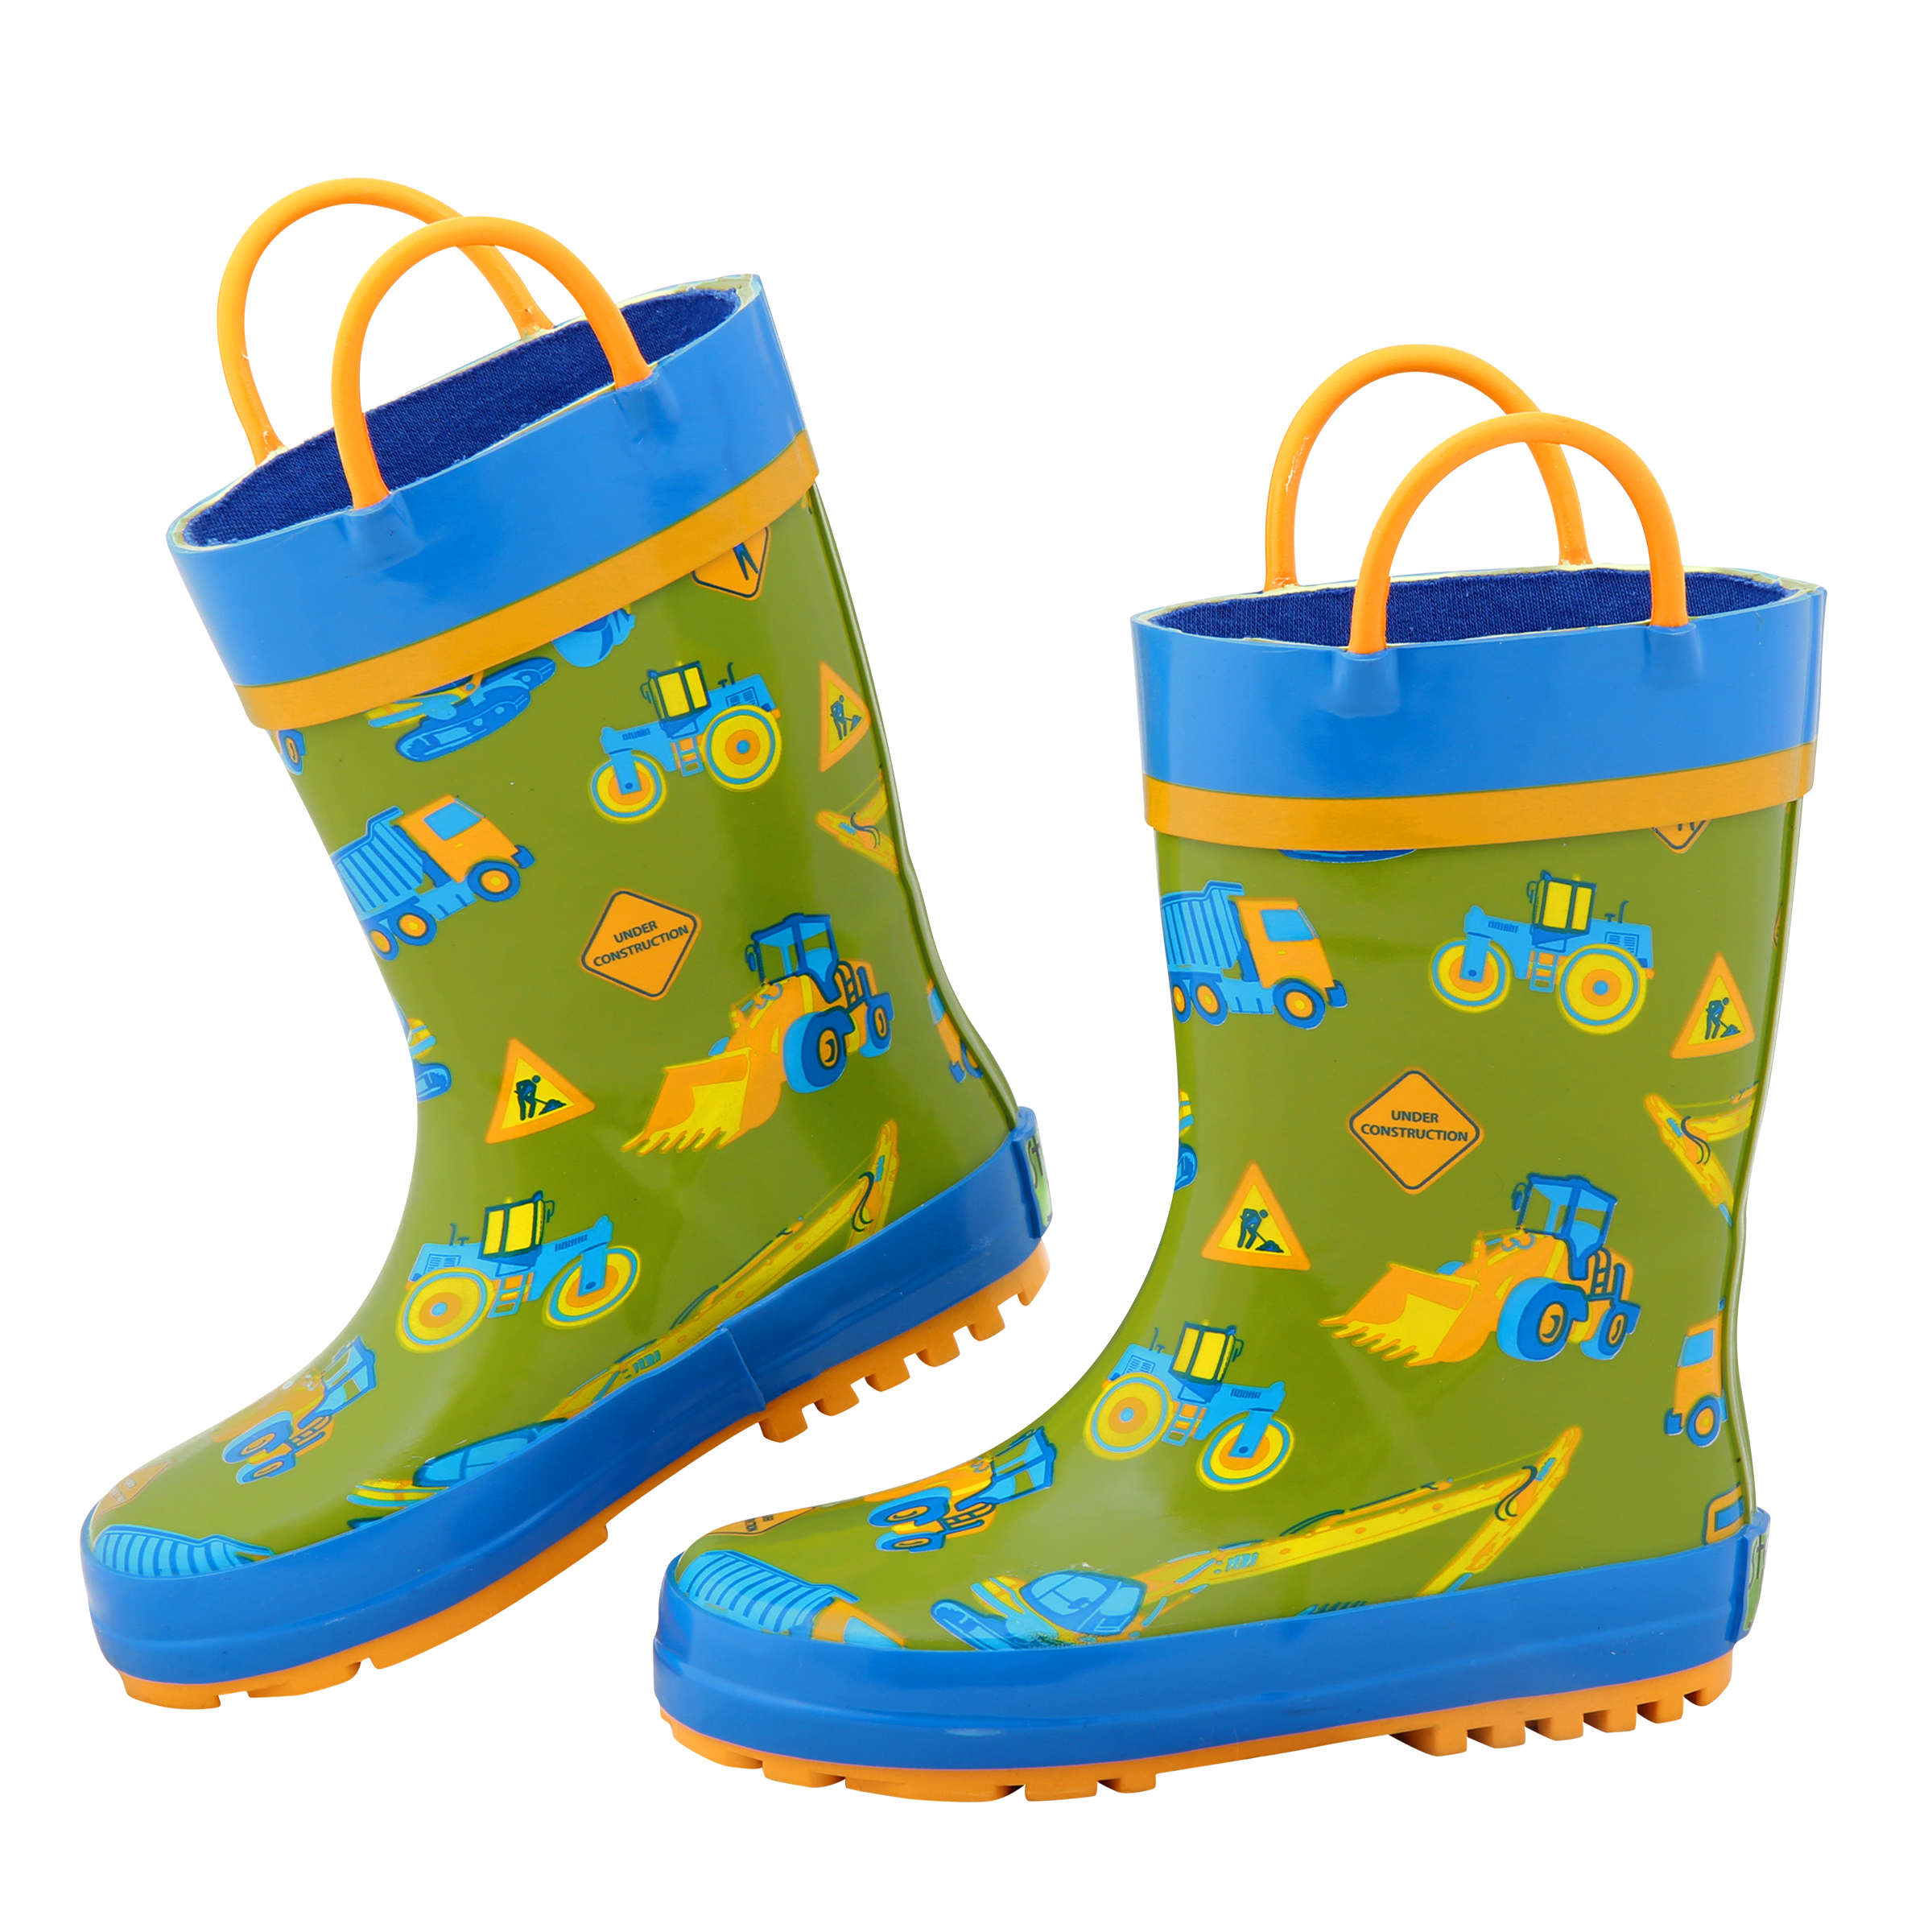 All Over Print Rainboots, Construction - image 1 of 4